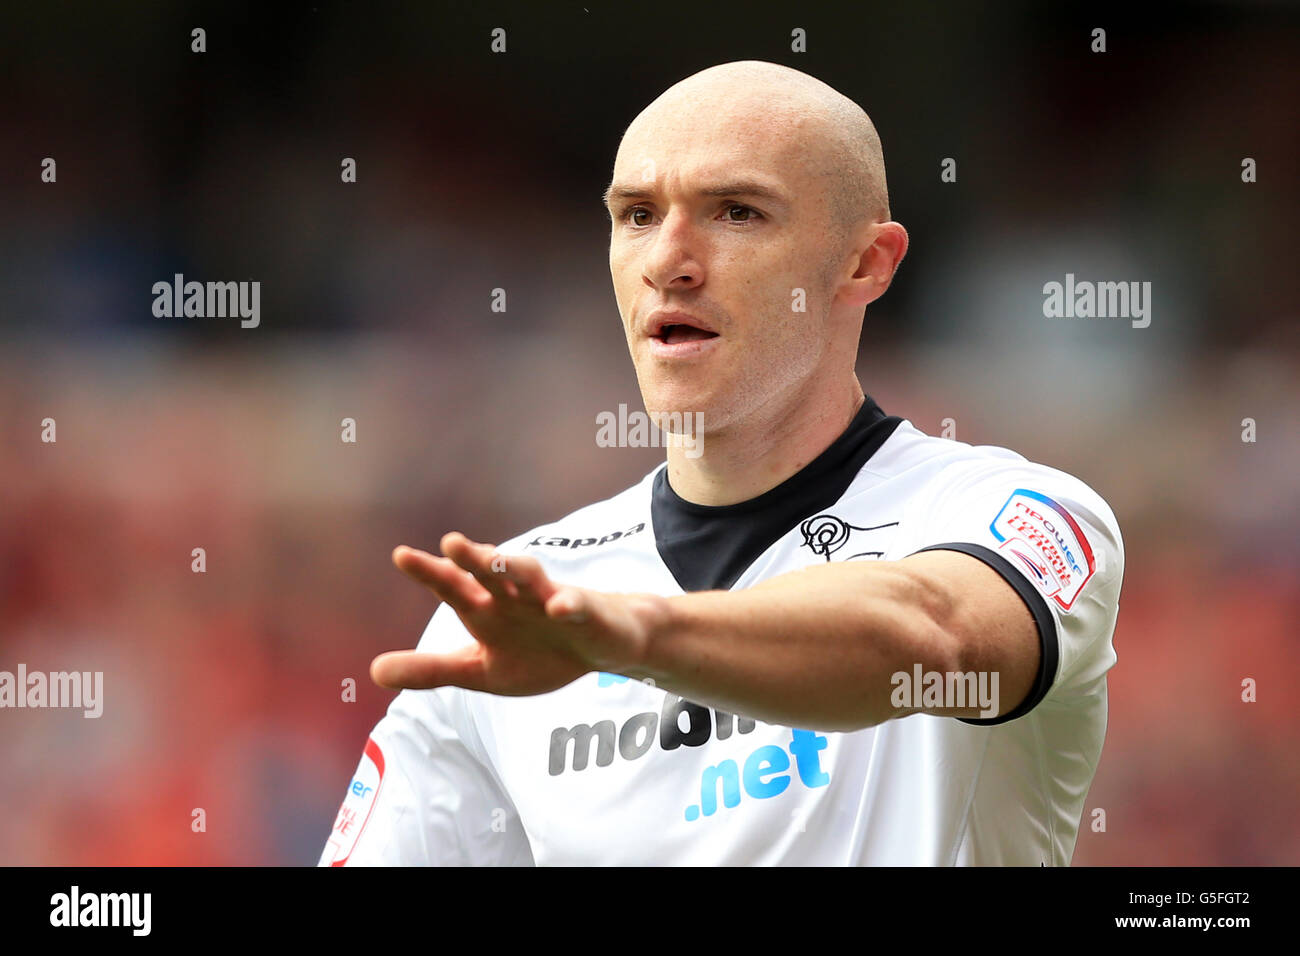 Calcio - Npower Football League Championship - Nottingham Forest / Derby County - City Ground. Connor Sammon, Derby County Foto Stock